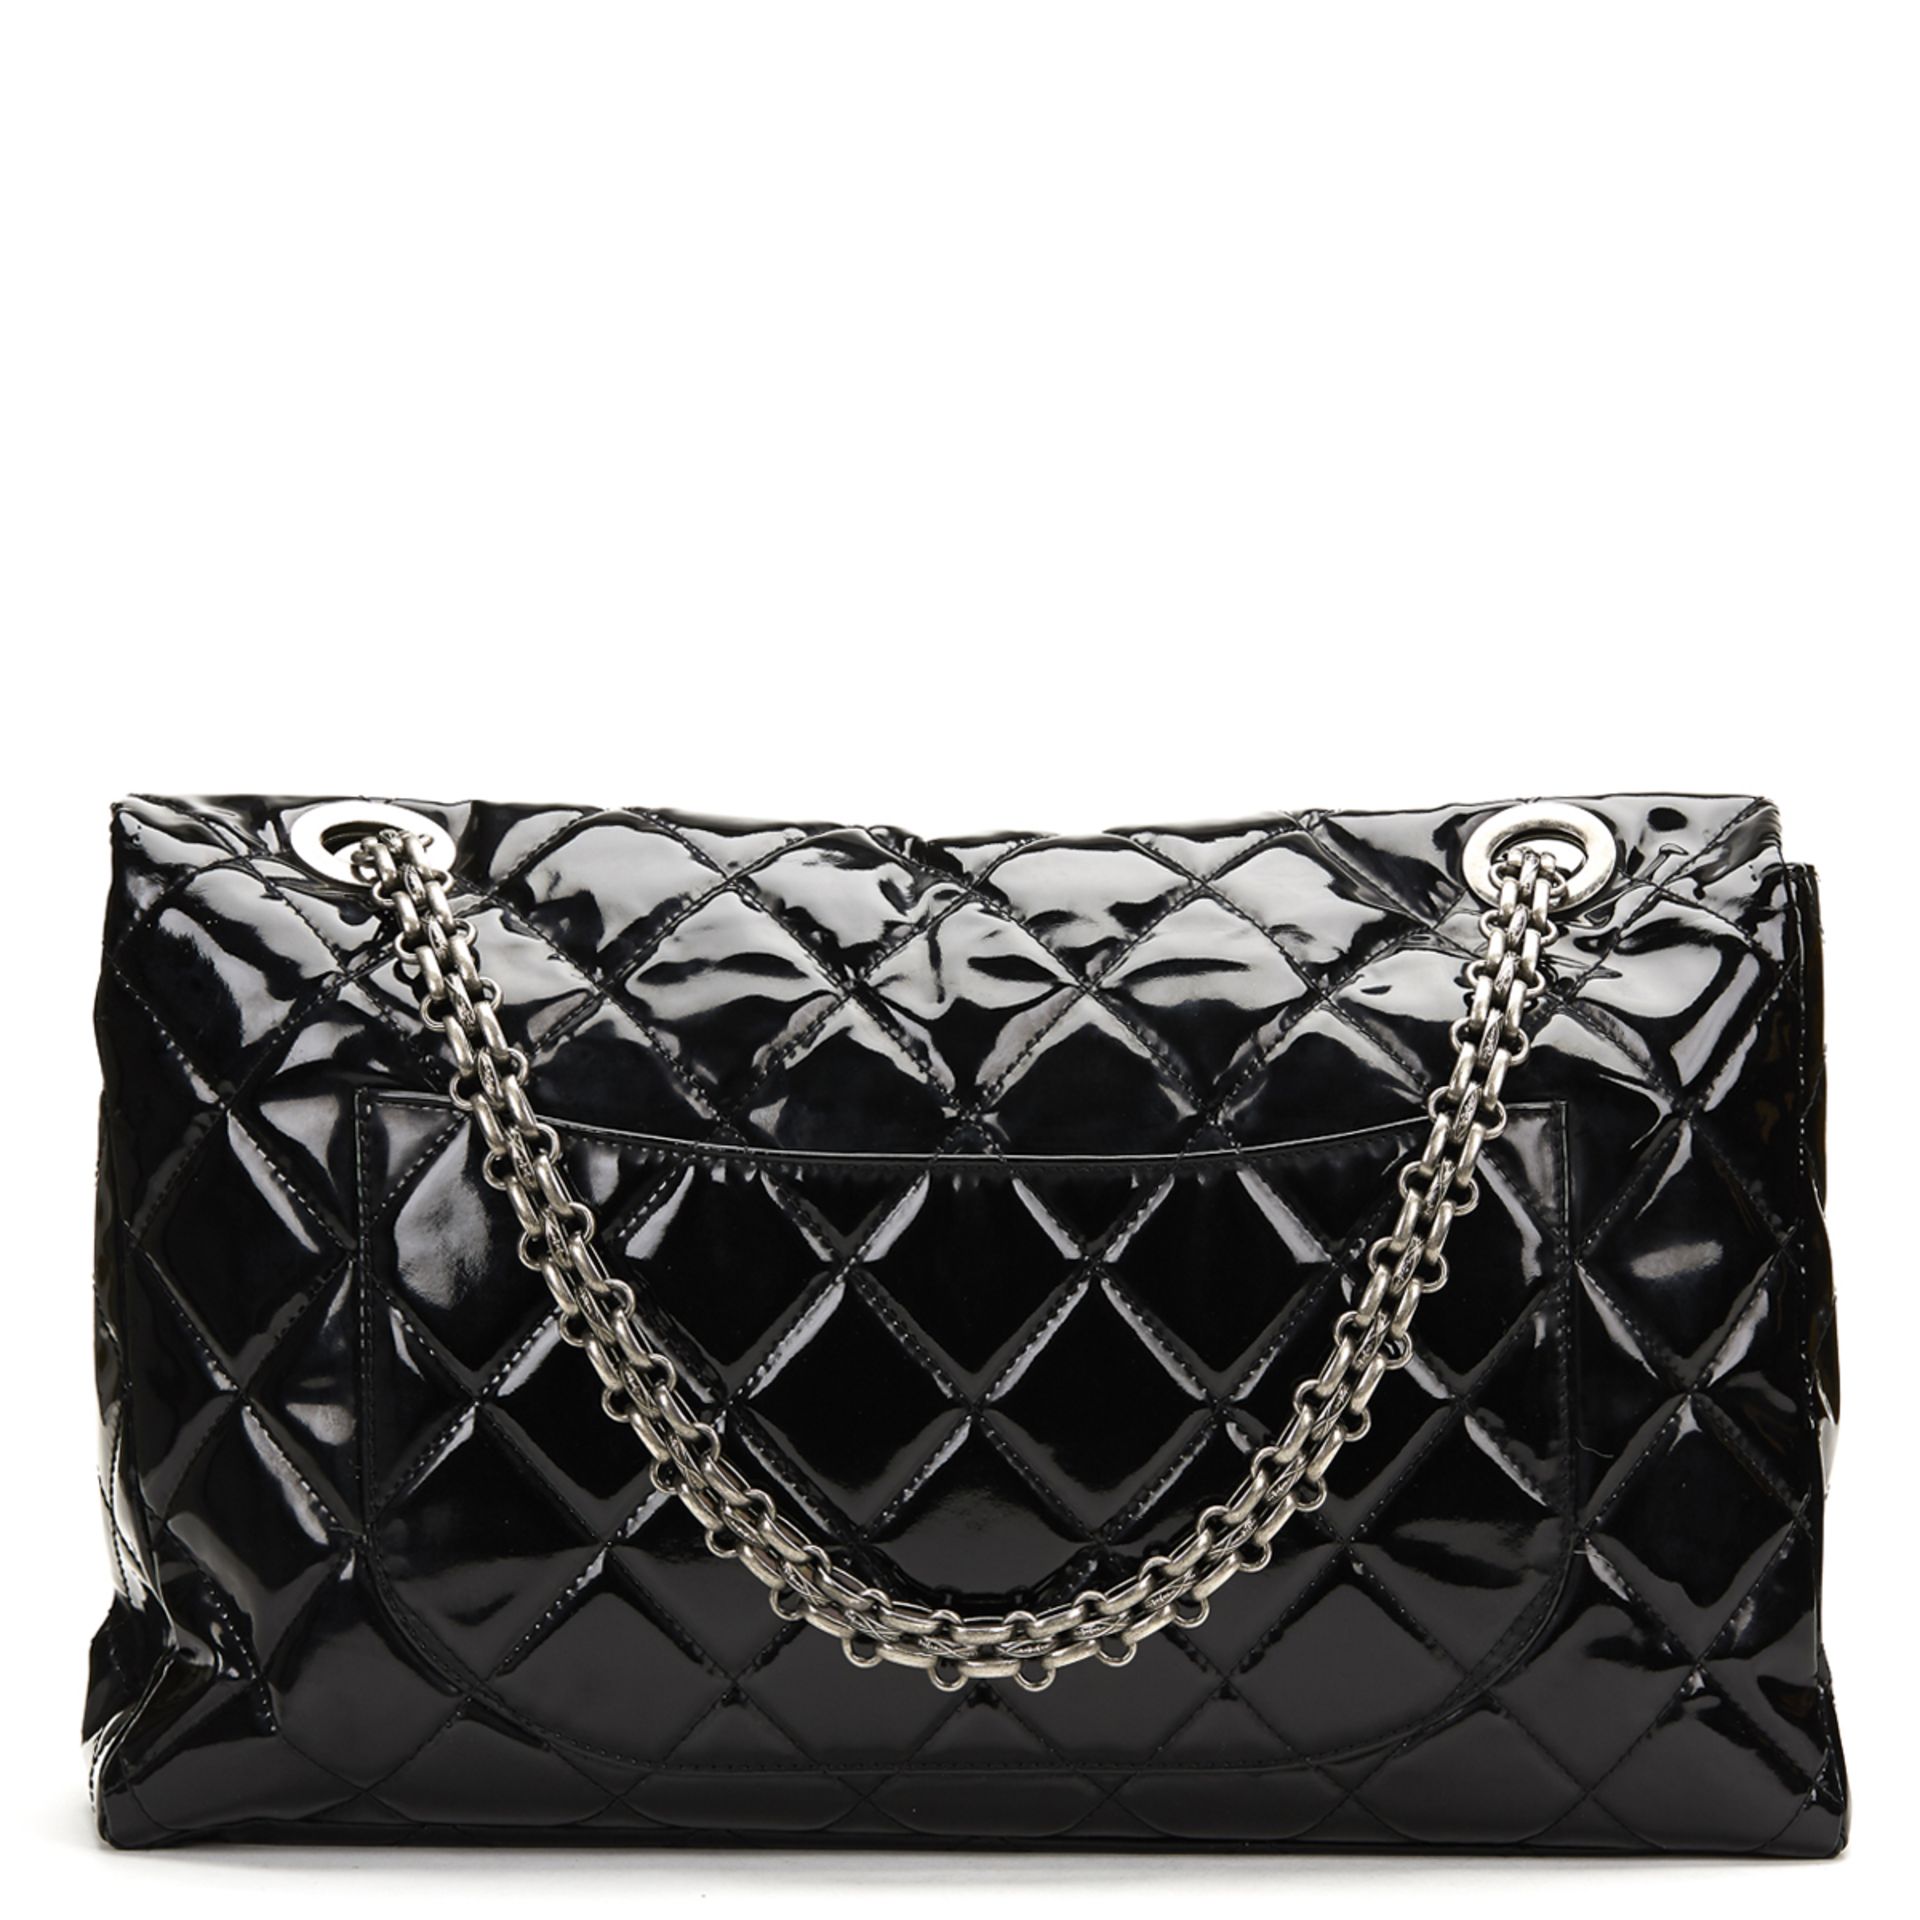 CHANEL Super Maxi 2.55 Reissue Flap Bag , - Black Quilted Patent Leather Super Maxi 2.55 Reissue - Image 4 of 9